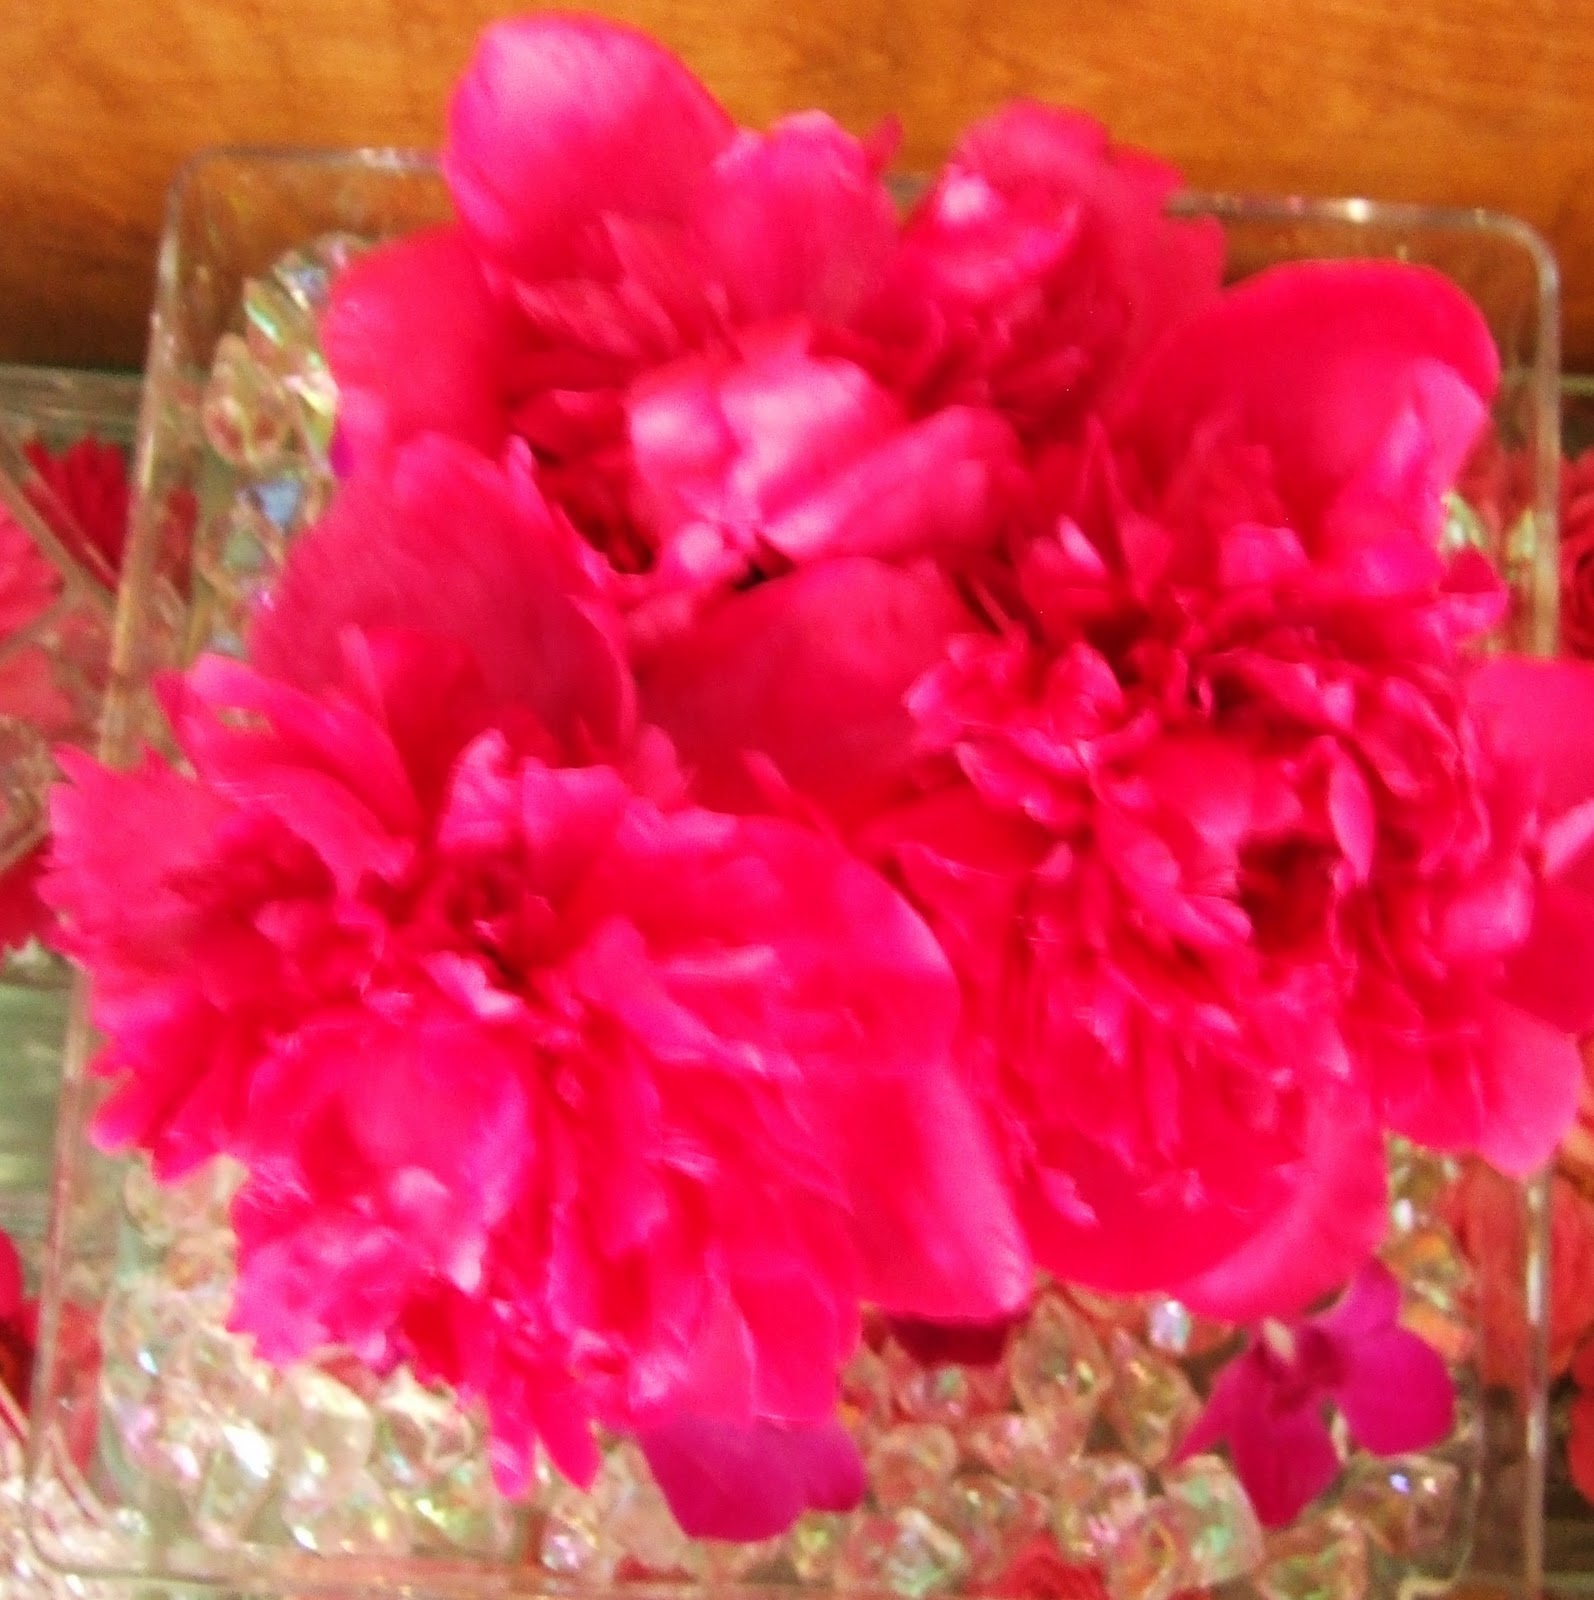 red centerpieces for weddings